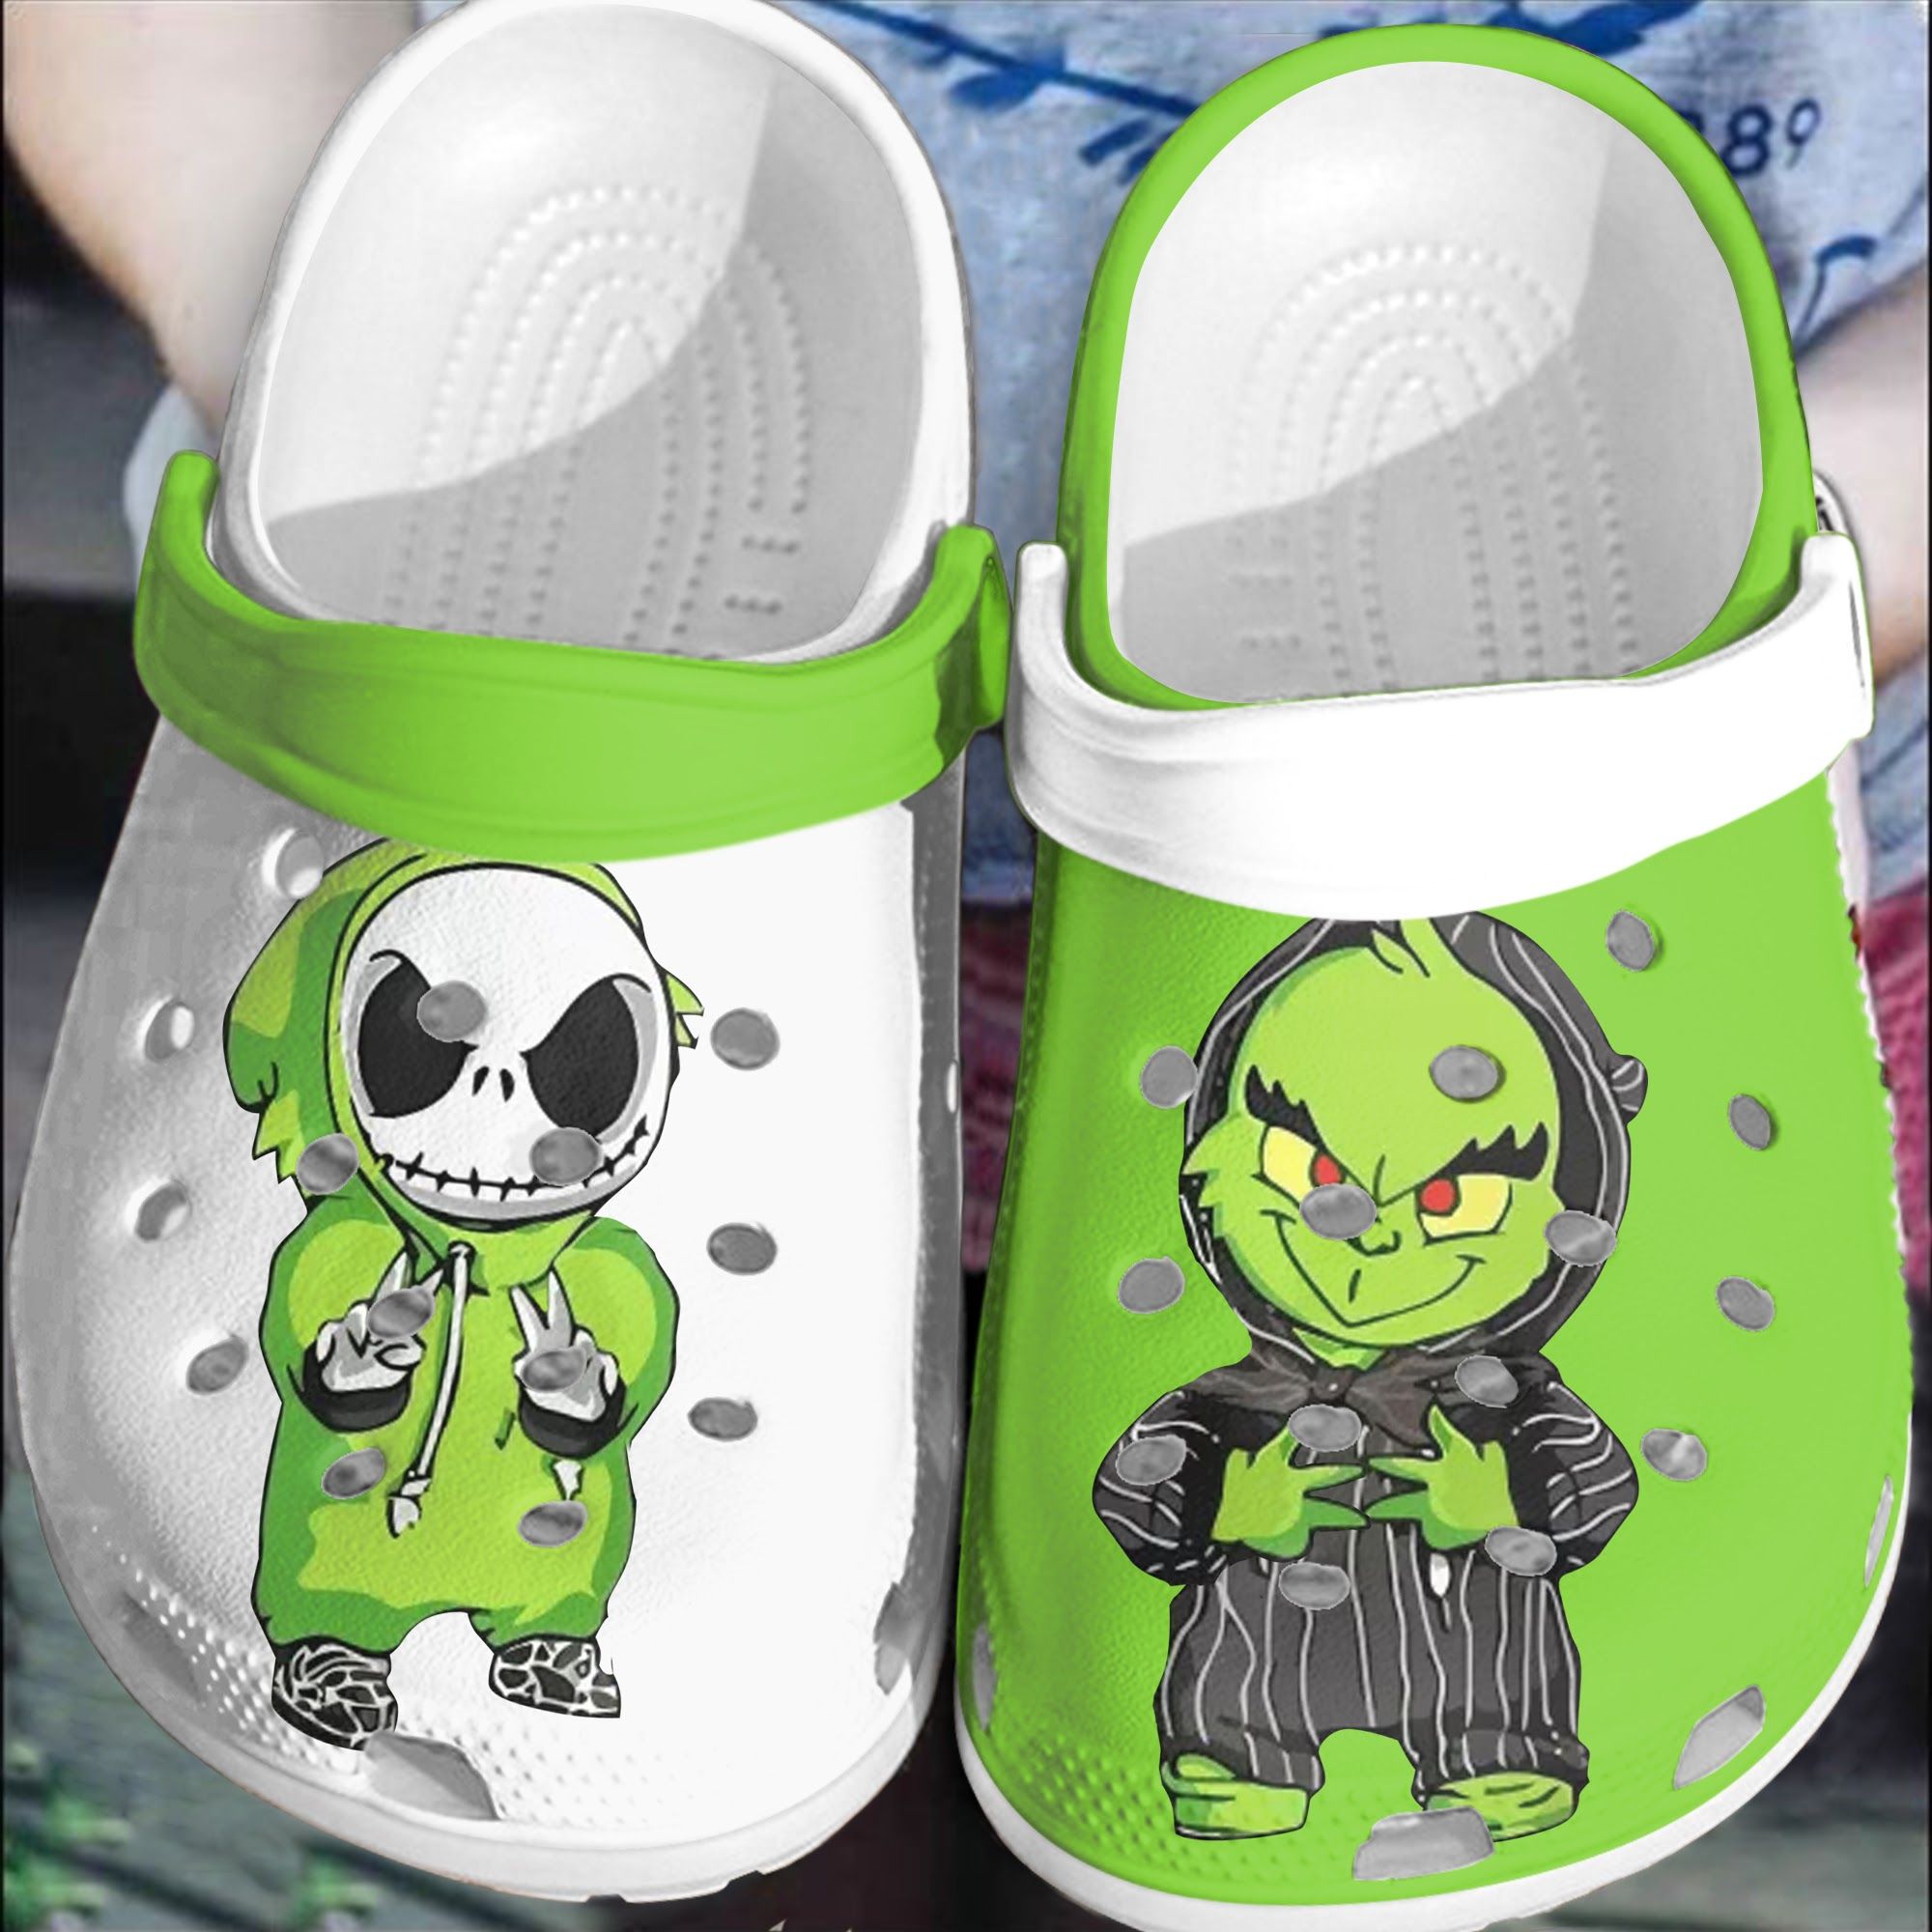 Find yourself a super cute Crocs shoe or give it as a gift 57